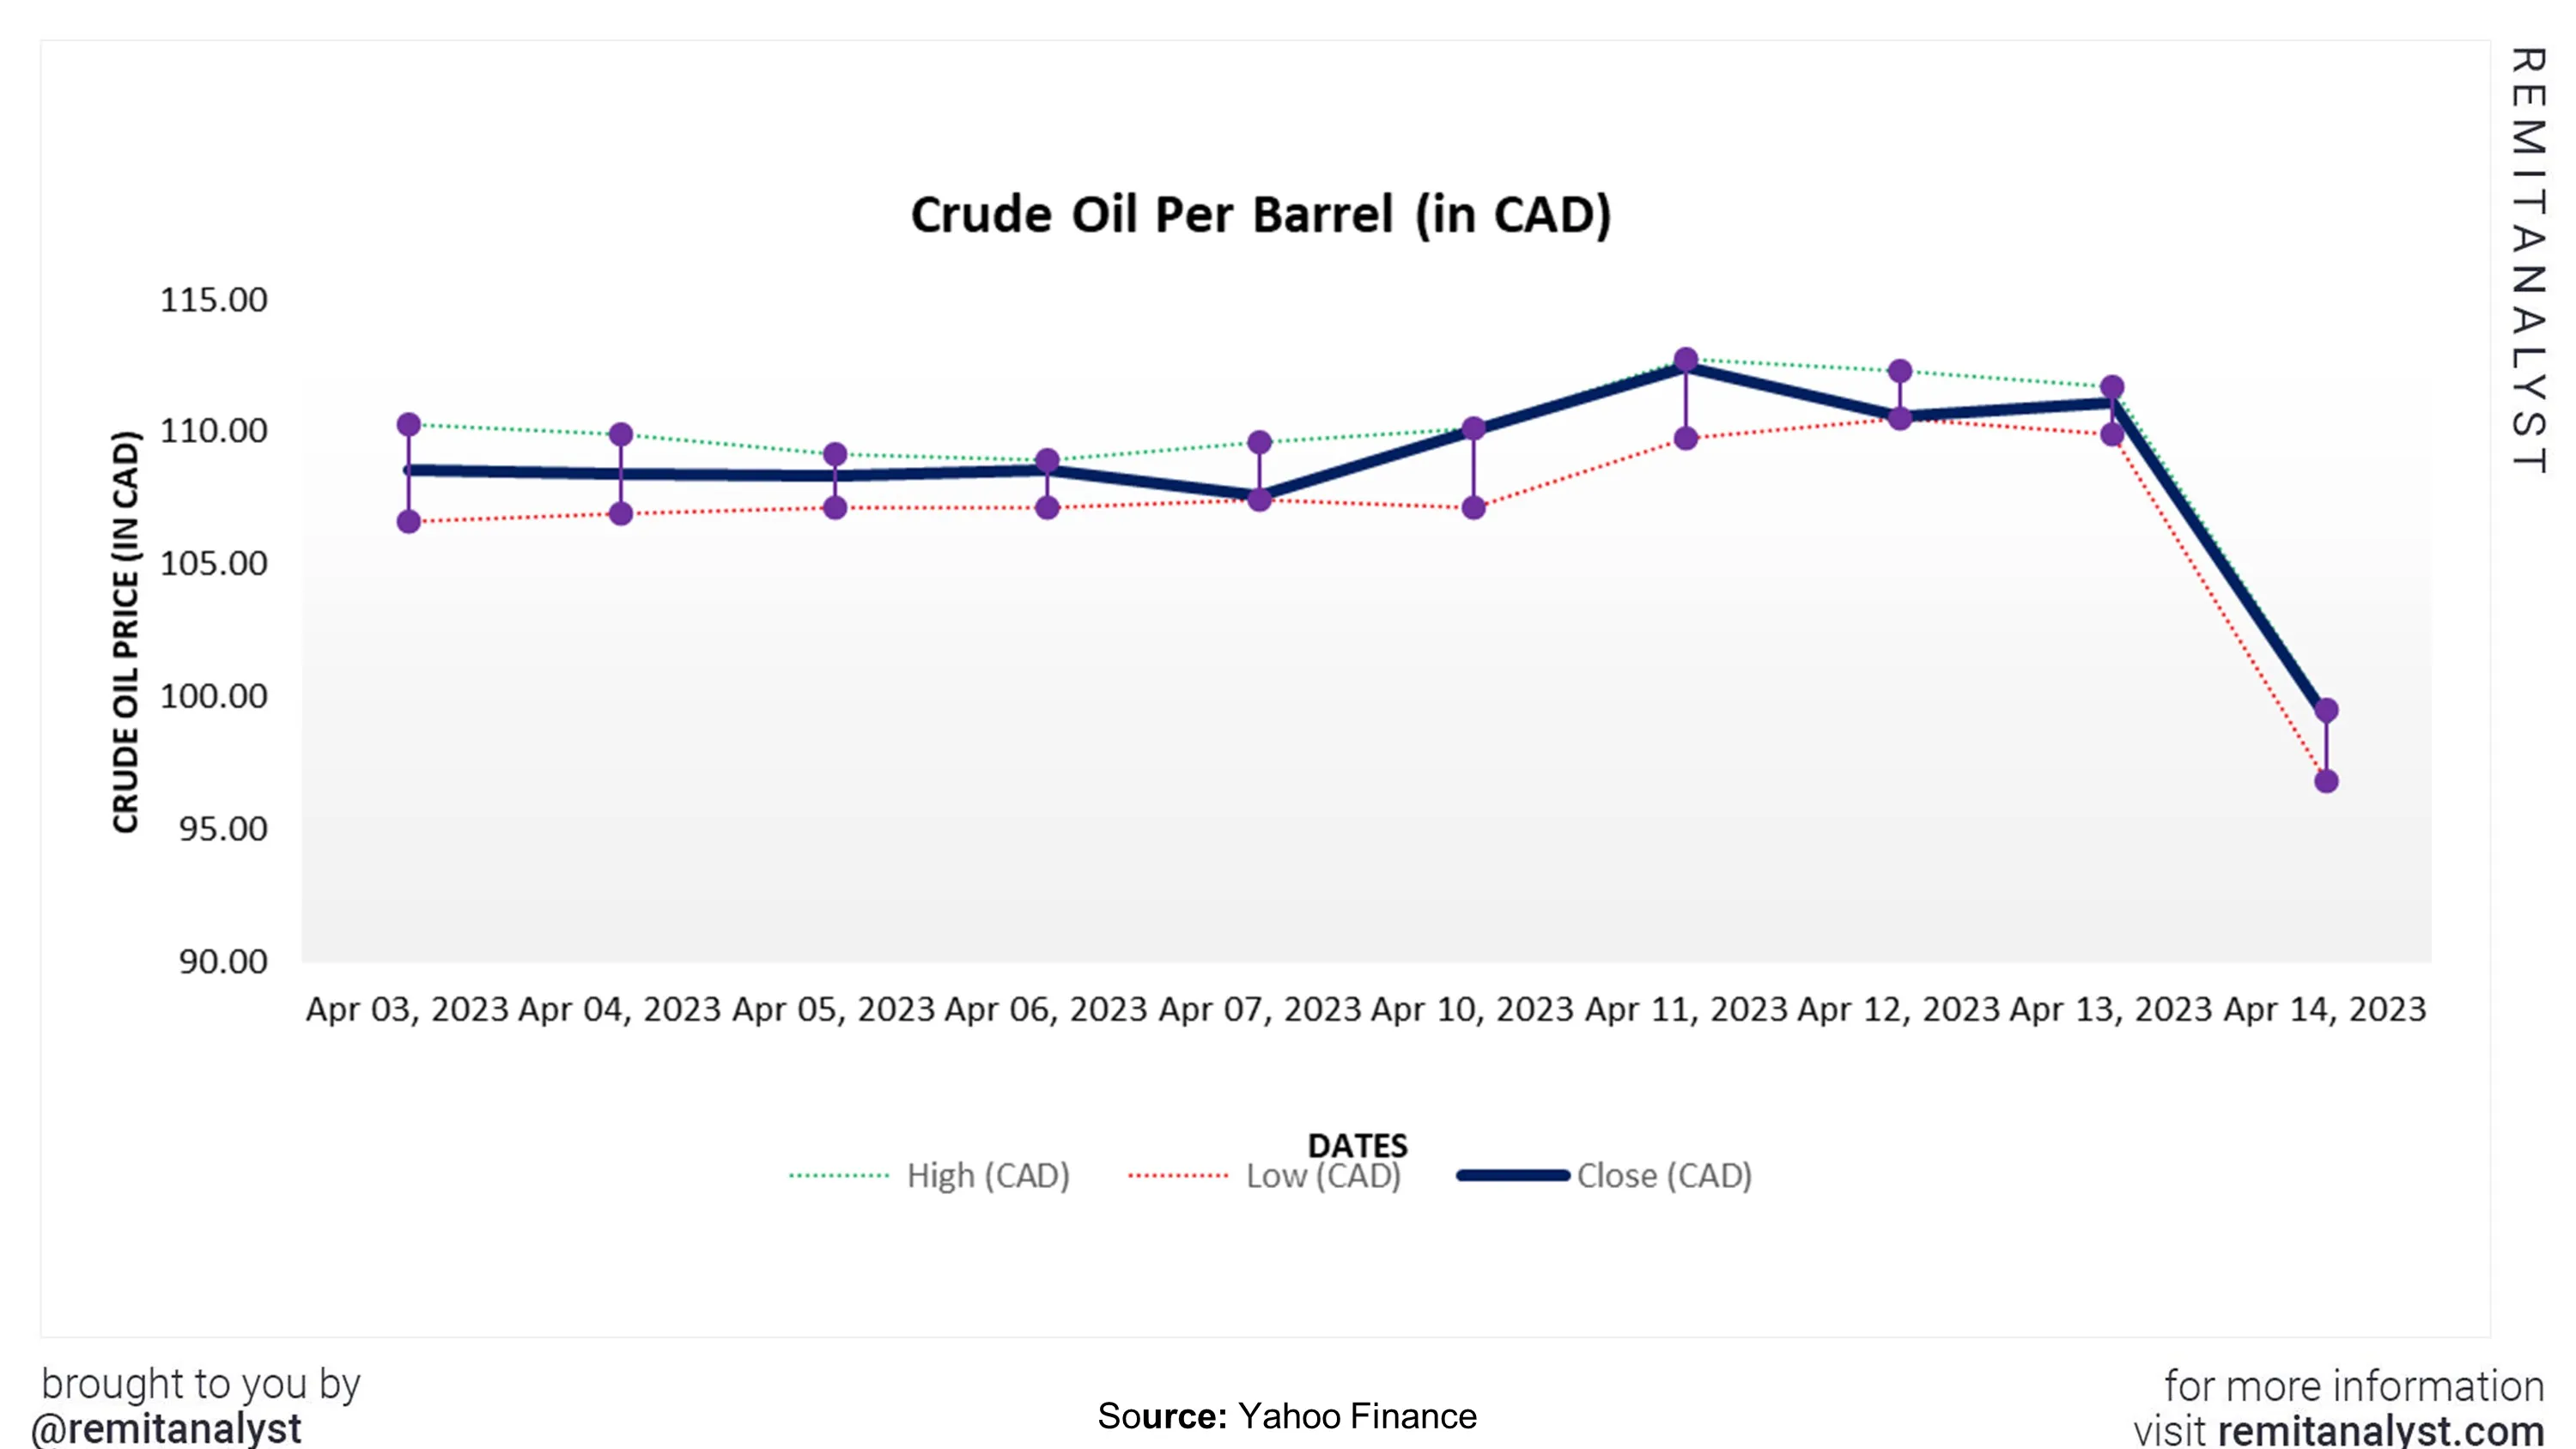 crude-oil-prices-canada-from-3-apr-2023-to-14-apr-2023